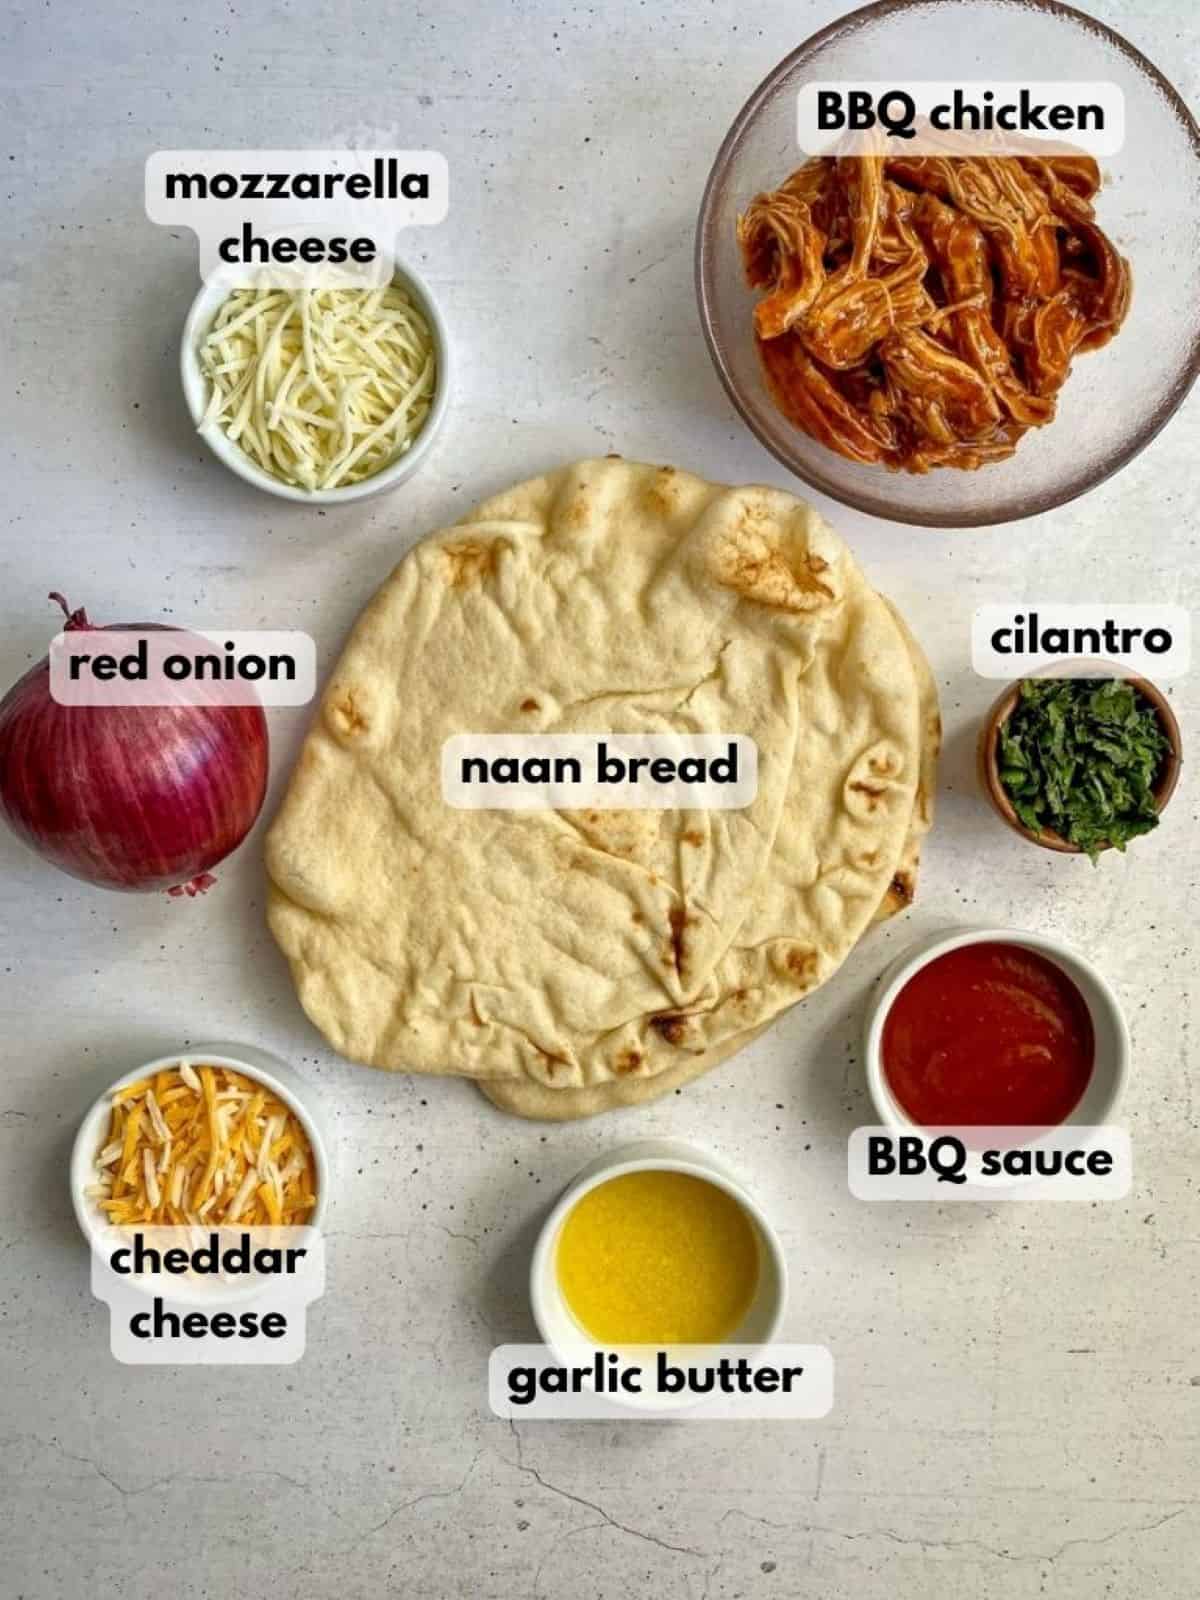 Ingredients needed to make BBQ chicken flatbread: naan bread, barbecue chicken, cheese, cilantro, bbq sauce, and garlic butter.